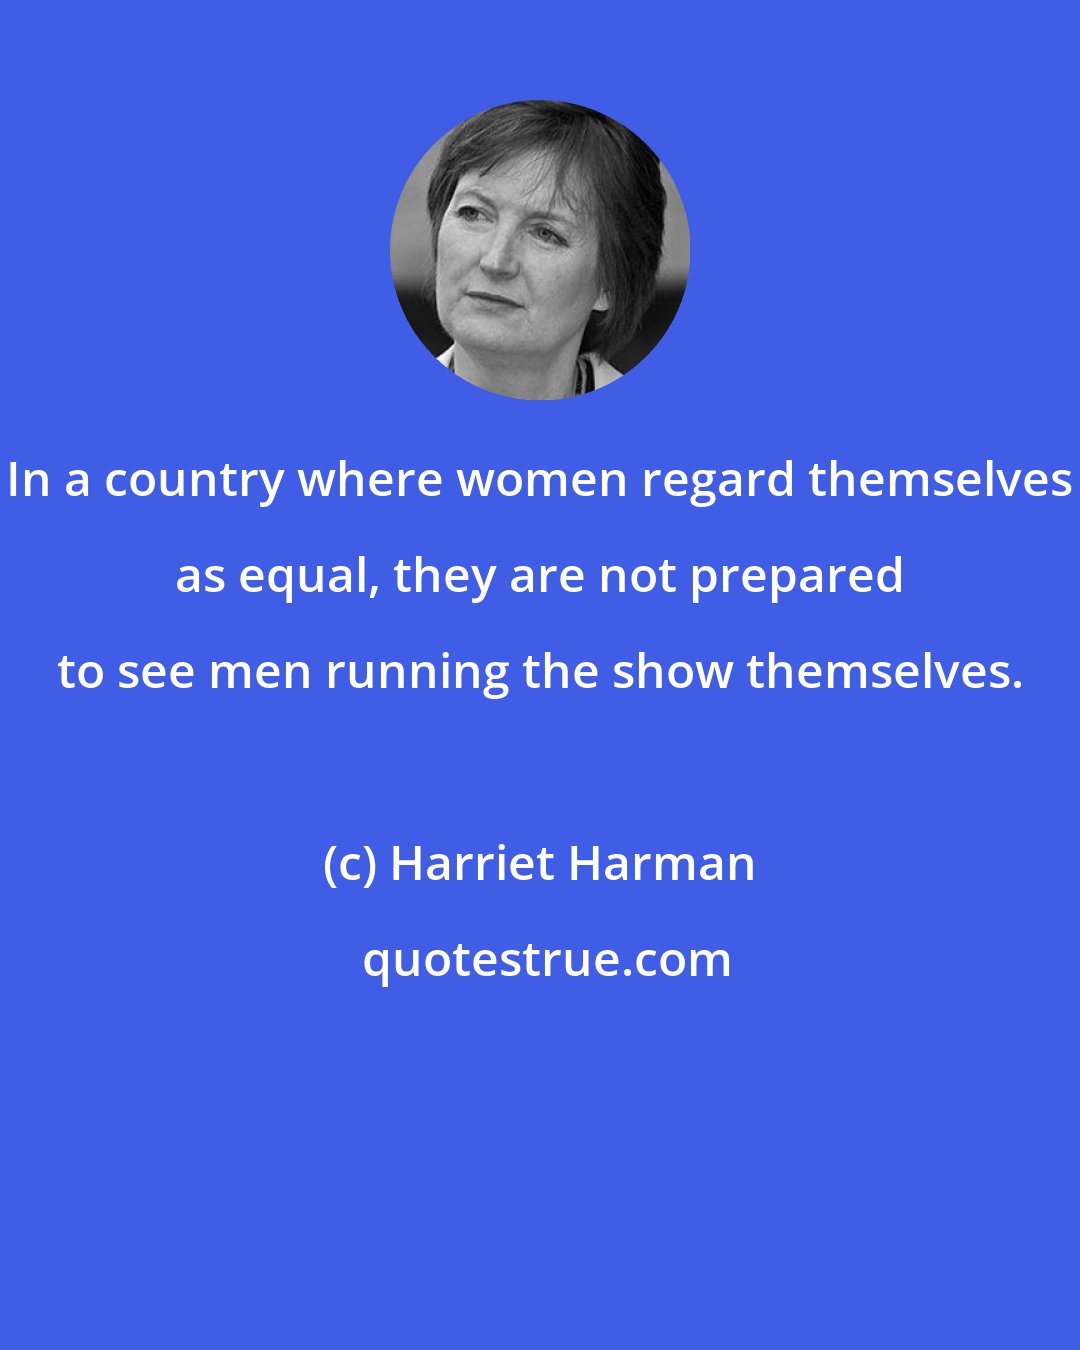 Harriet Harman: In a country where women regard themselves as equal, they are not prepared to see men running the show themselves.